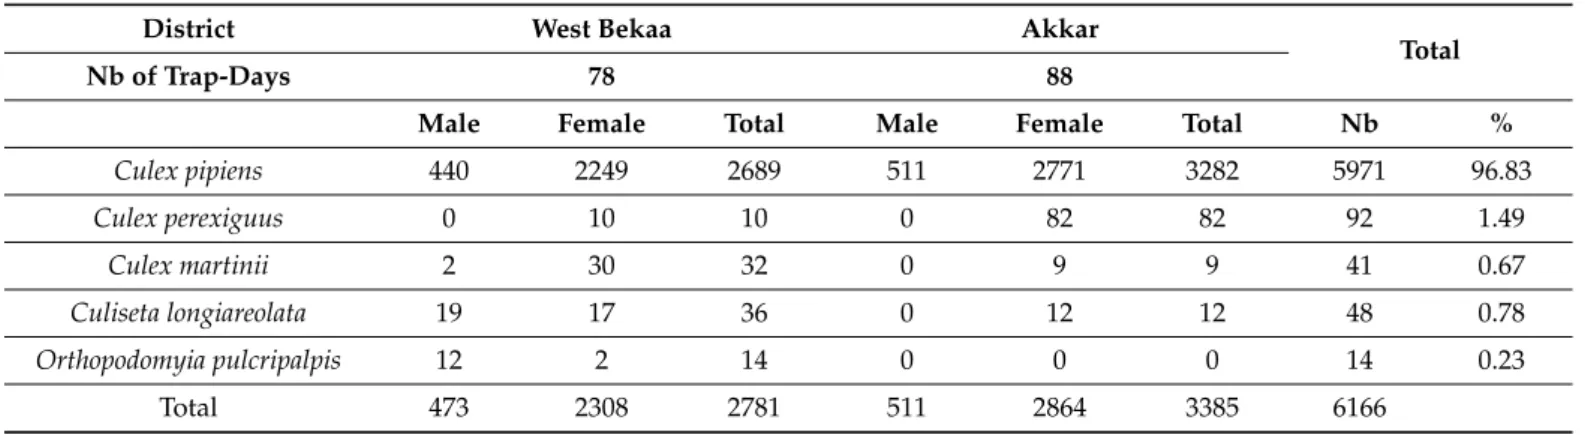 Table 3. Species composition of collected mosquitoes in West Bekaa and Akkar districts during summer 2014.